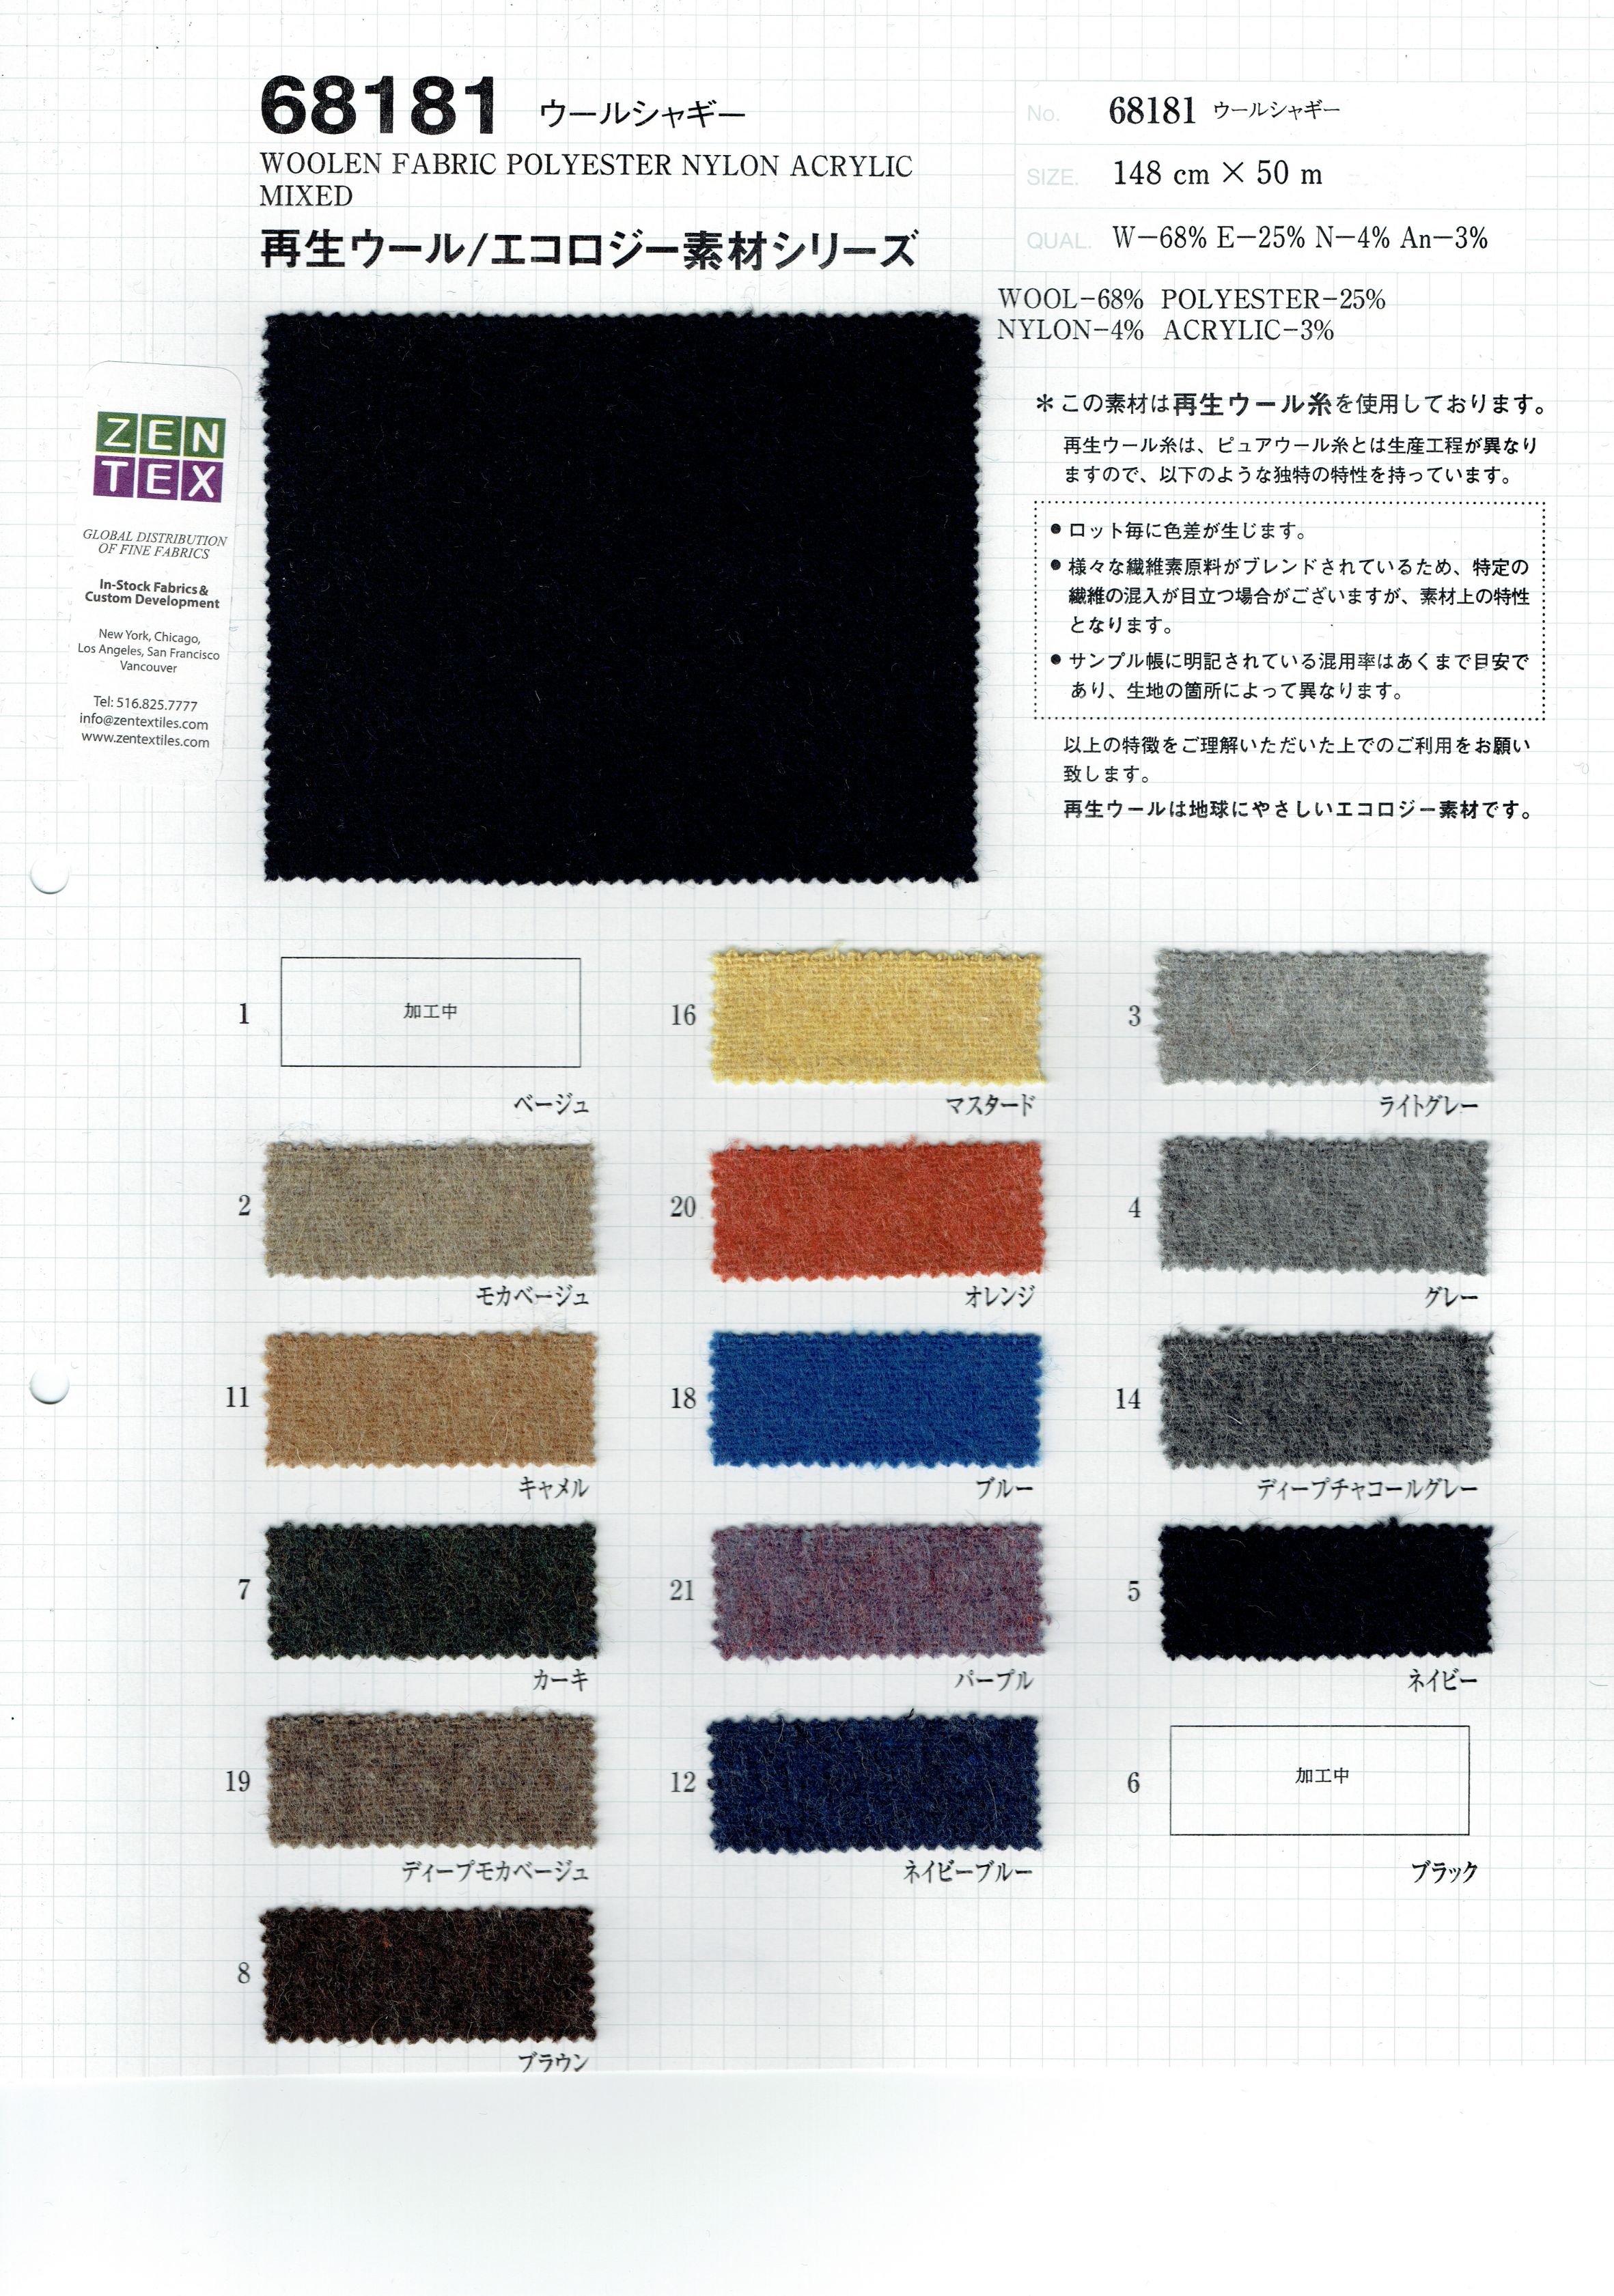 View 68% WOOLEN FABRIC 25% POLYESTER 4% NYLON 3% ACRYLIC MIXED